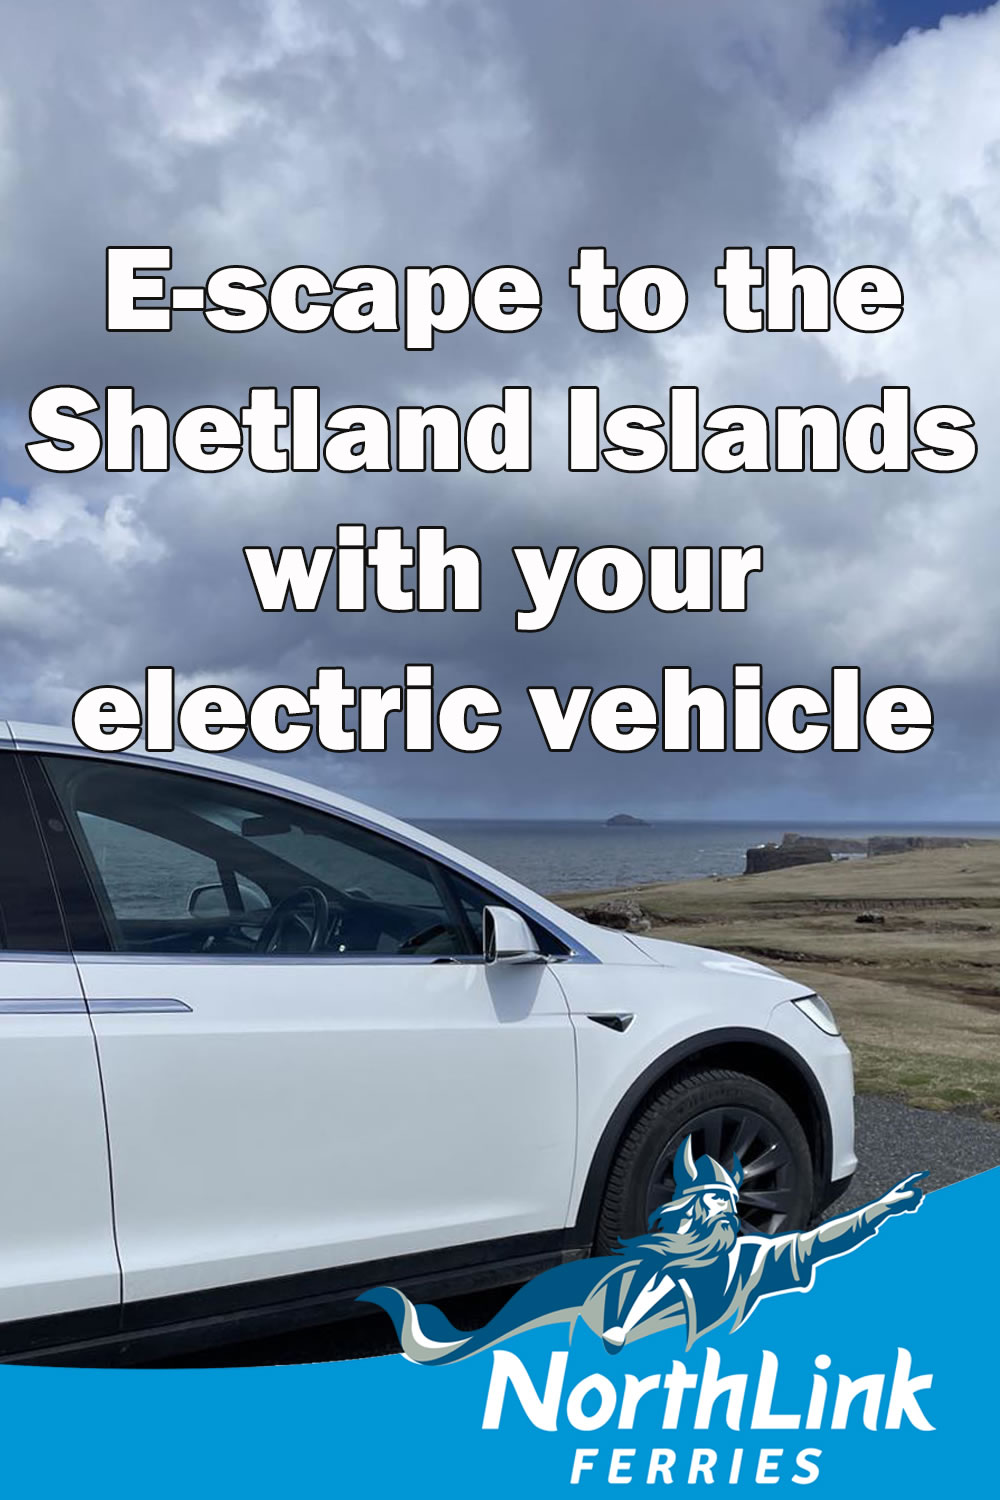 E-scape to the Shetland Islands with your electric vehicle